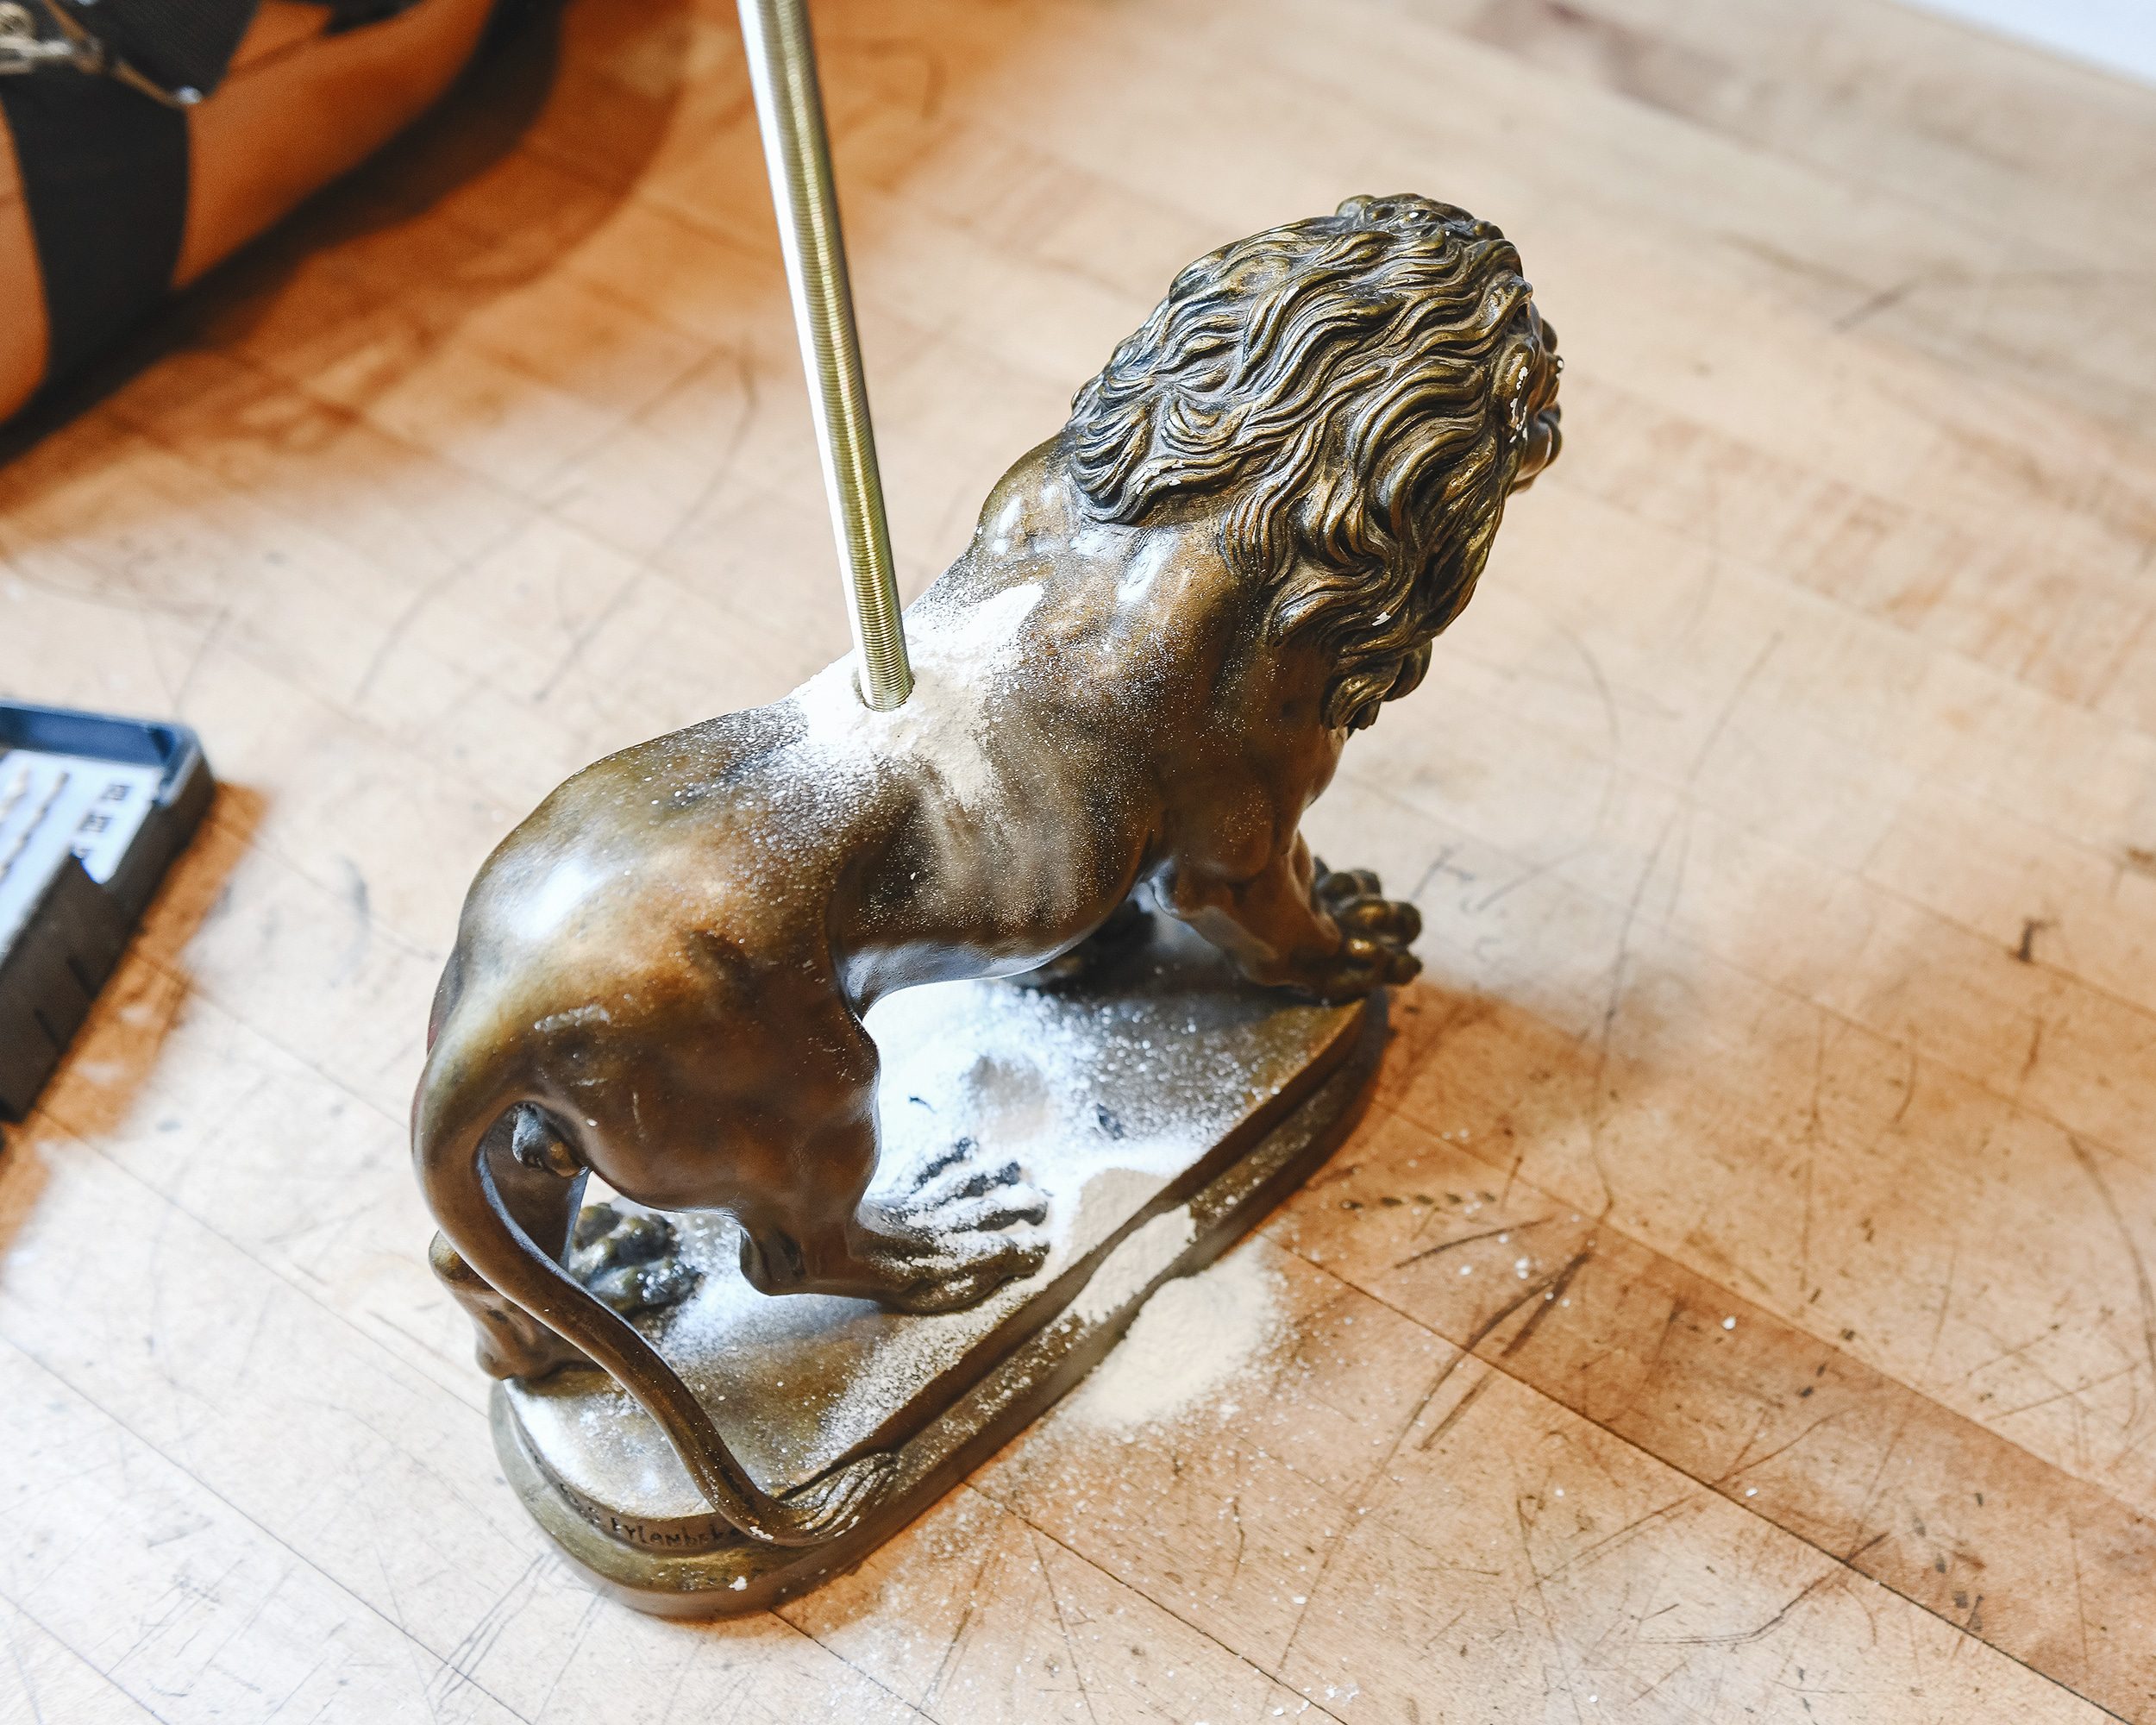 Test-fitting the lamp rod through the lion's body  // via Yellow Brick Home